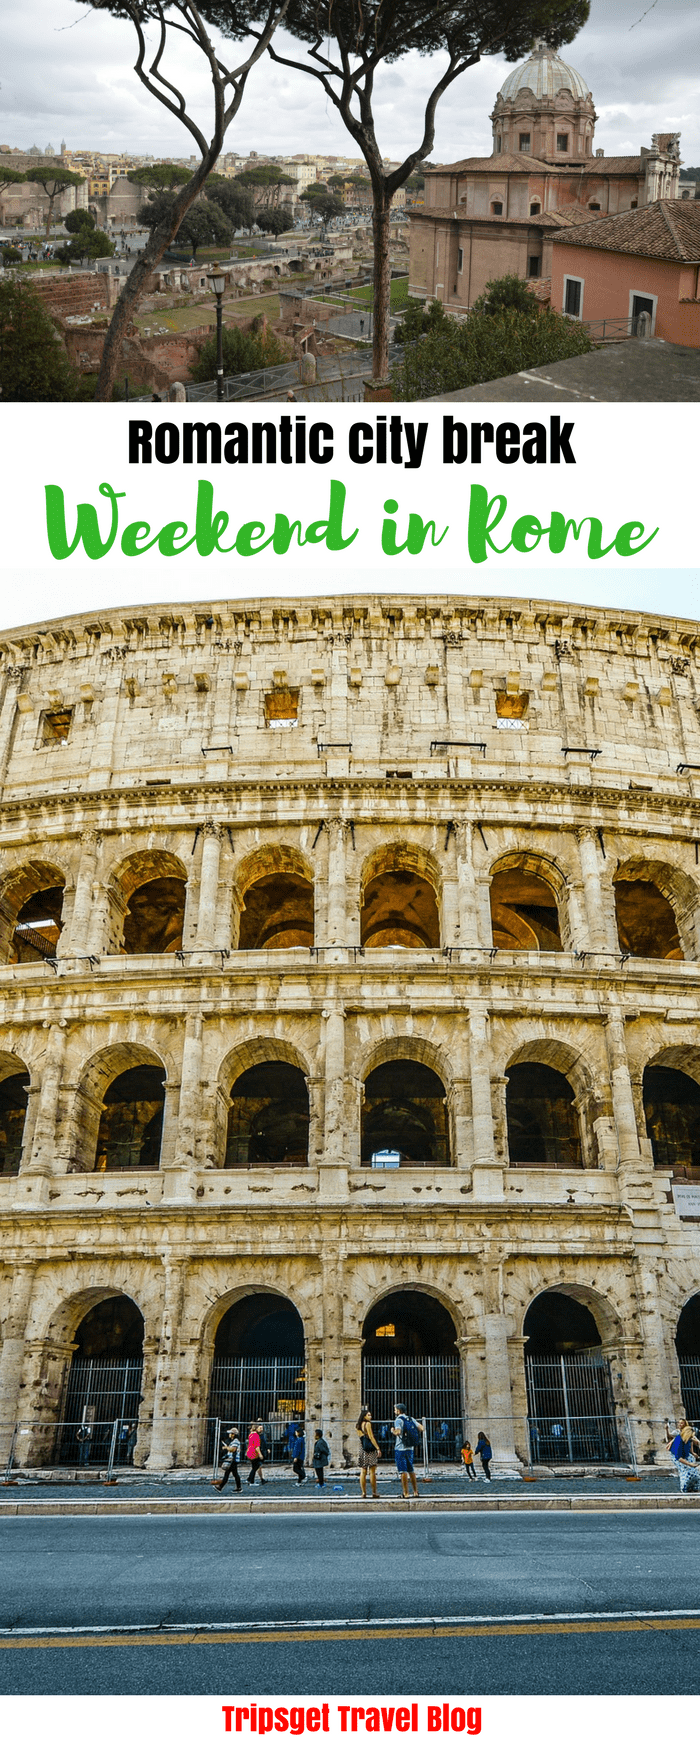 Rome weekend break: ideas for a romantic getaway: couples getaway ideas, 3 days in Rome, Italy. Best weekend trips for couples.